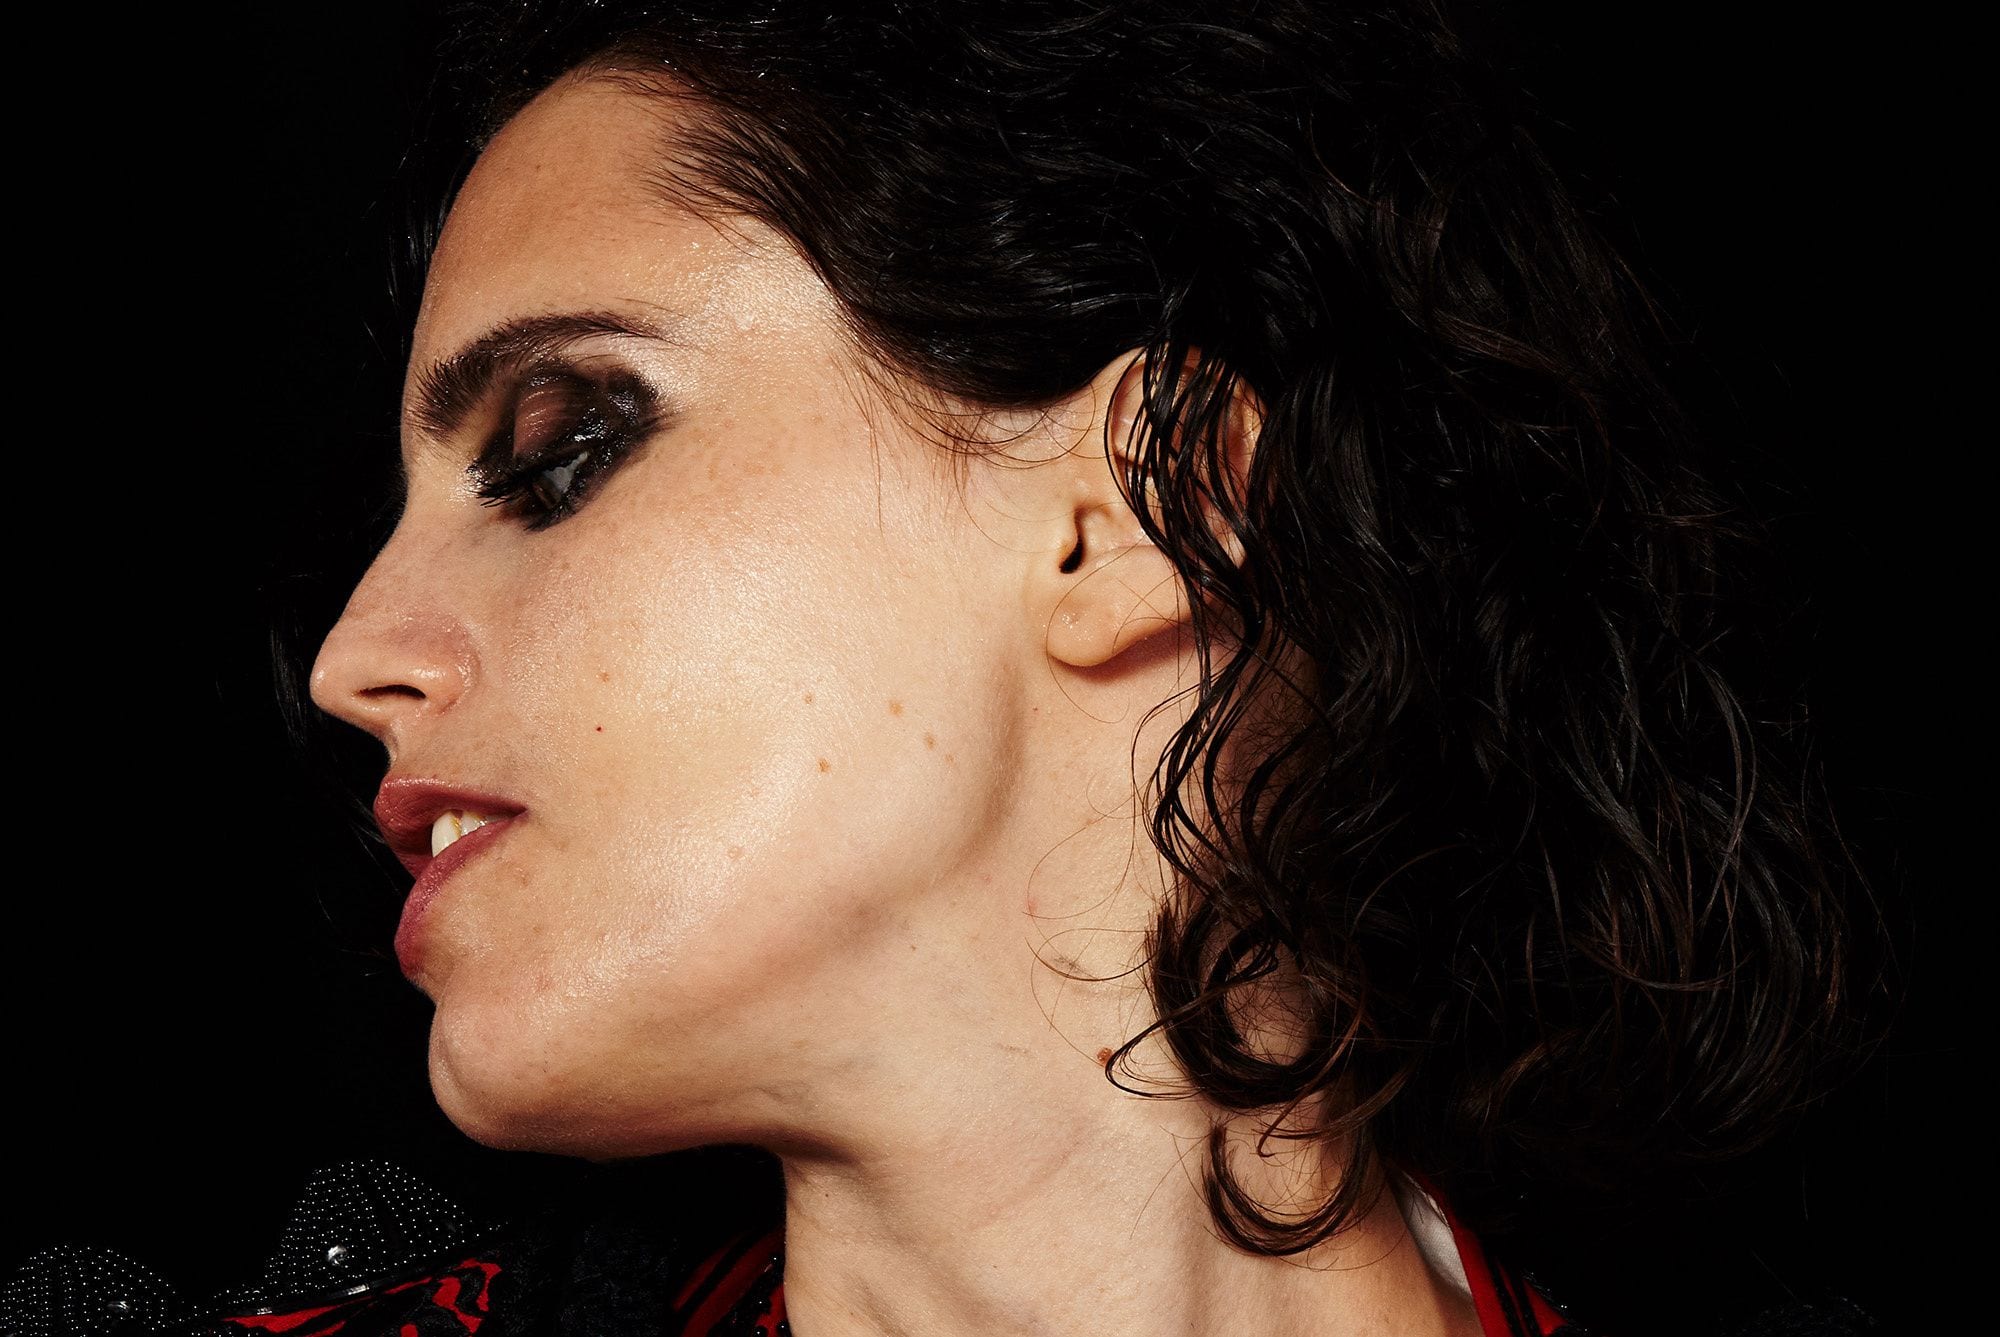 Anna Calvi Re-writes Her Own History on ‘Hunted’